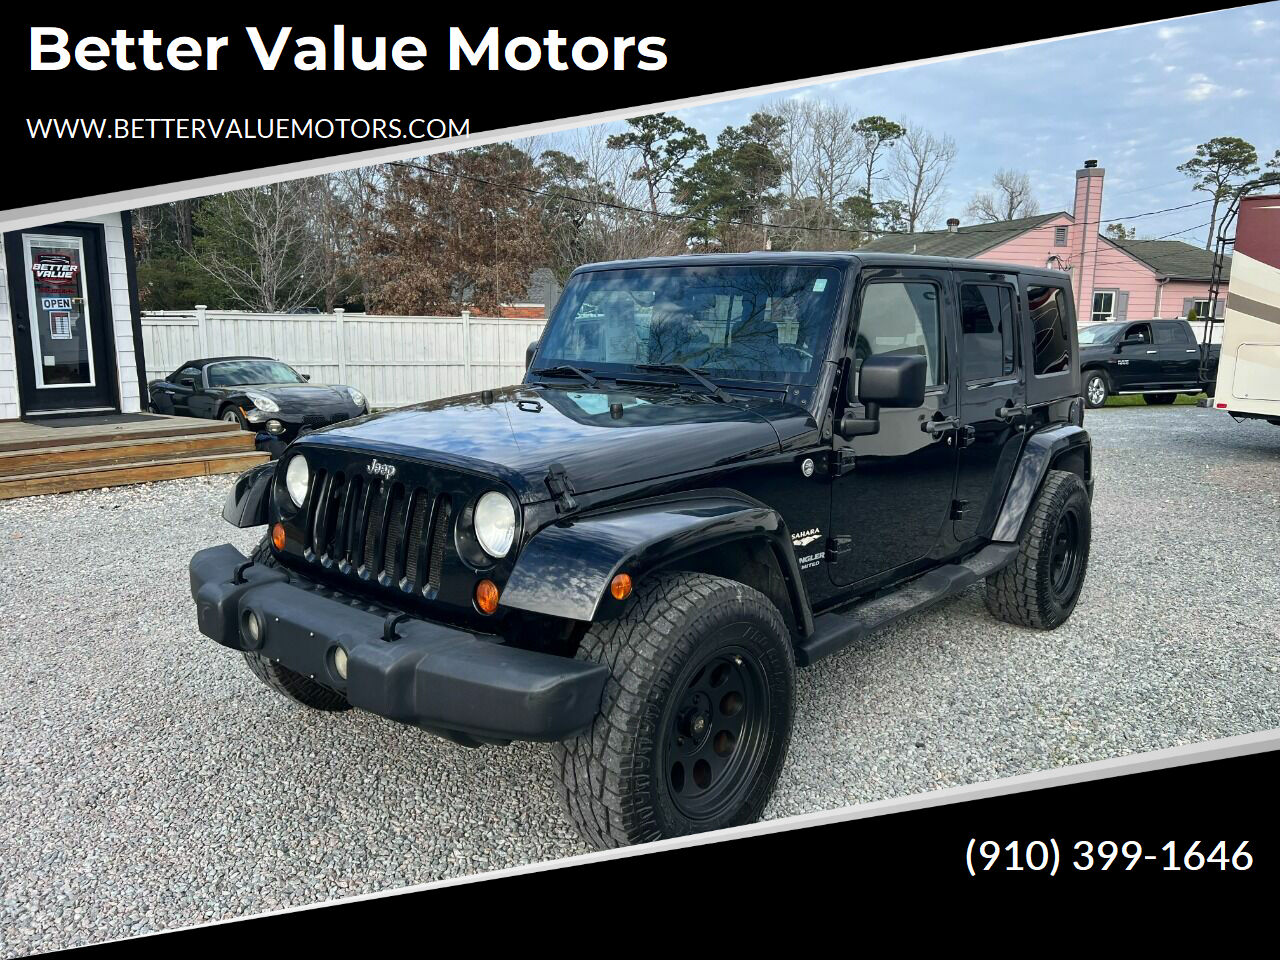 2007 Jeep Wrangler Unlimited For Sale In North Carolina ®